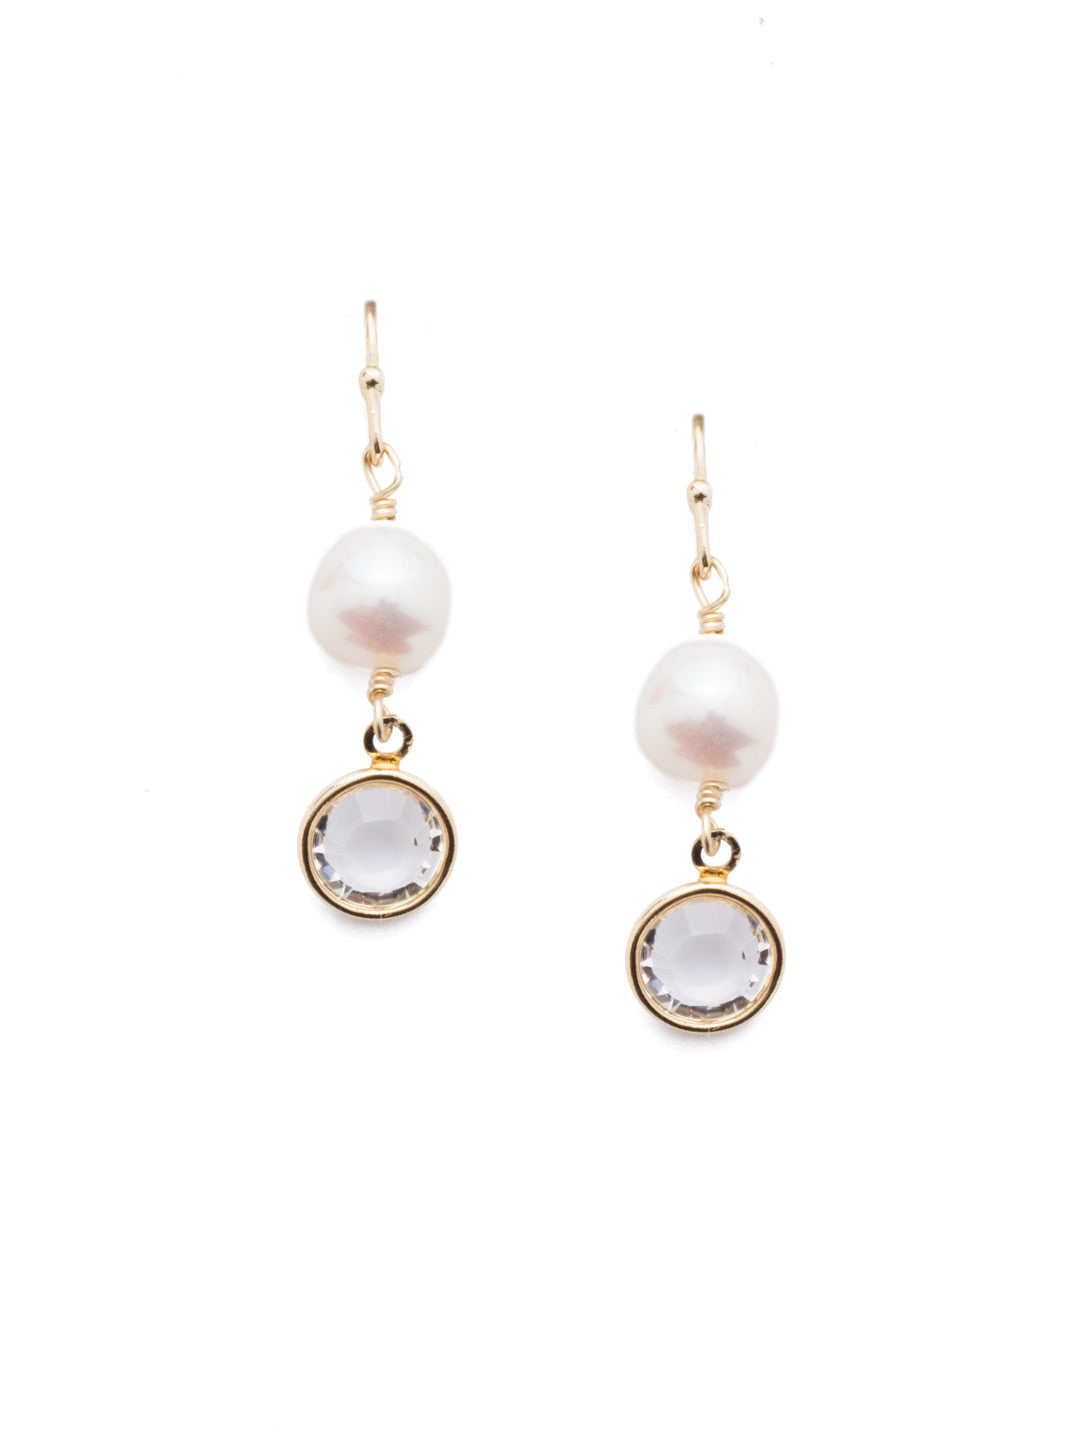 Luminous Dangle Earring - EEF69BGPLP - <p>Delicate and understated with a single freshwater pearl and sparkling crystal, go for these drop earrings when you simply want to feel pretty. From Sorrelli's Polished Pearl collection in our Bright Gold-tone finish.</p>